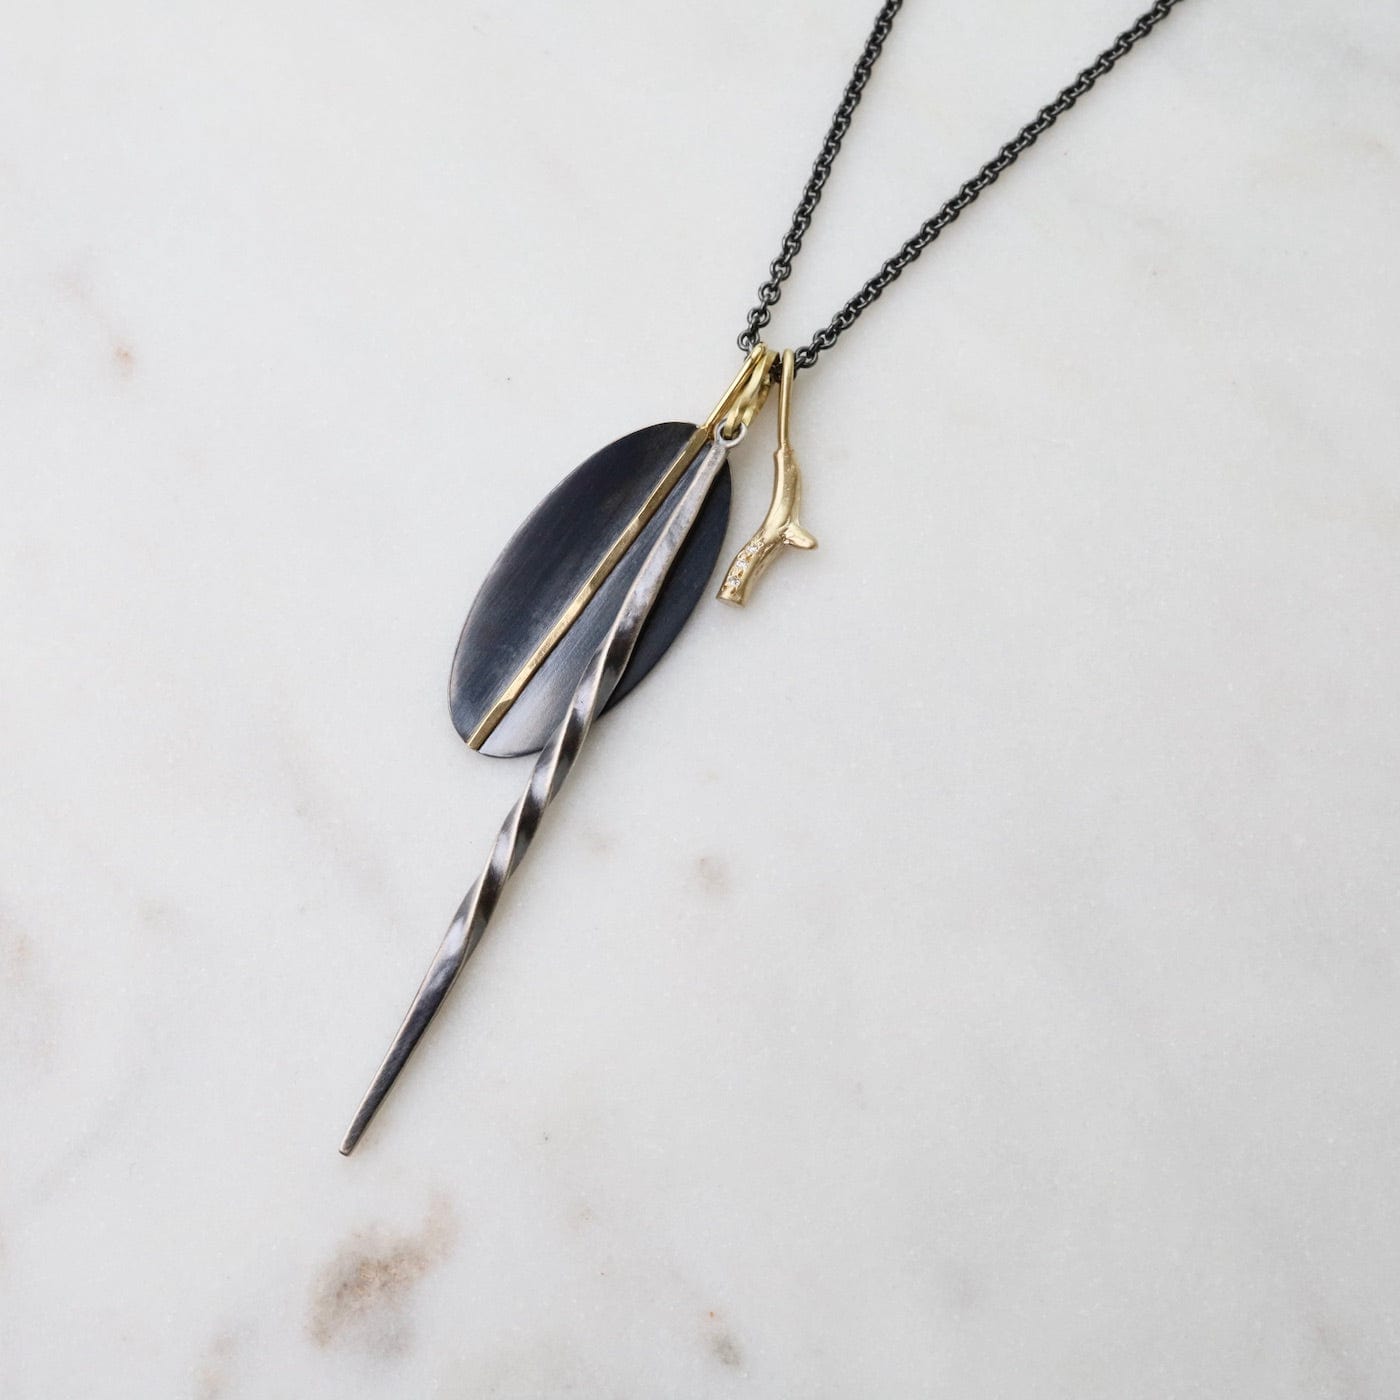 NKL-18K Cluster Necklace with Oxidized Silver Spire, Two-tone Narrow Mod Pendant & 14k Pave Branch